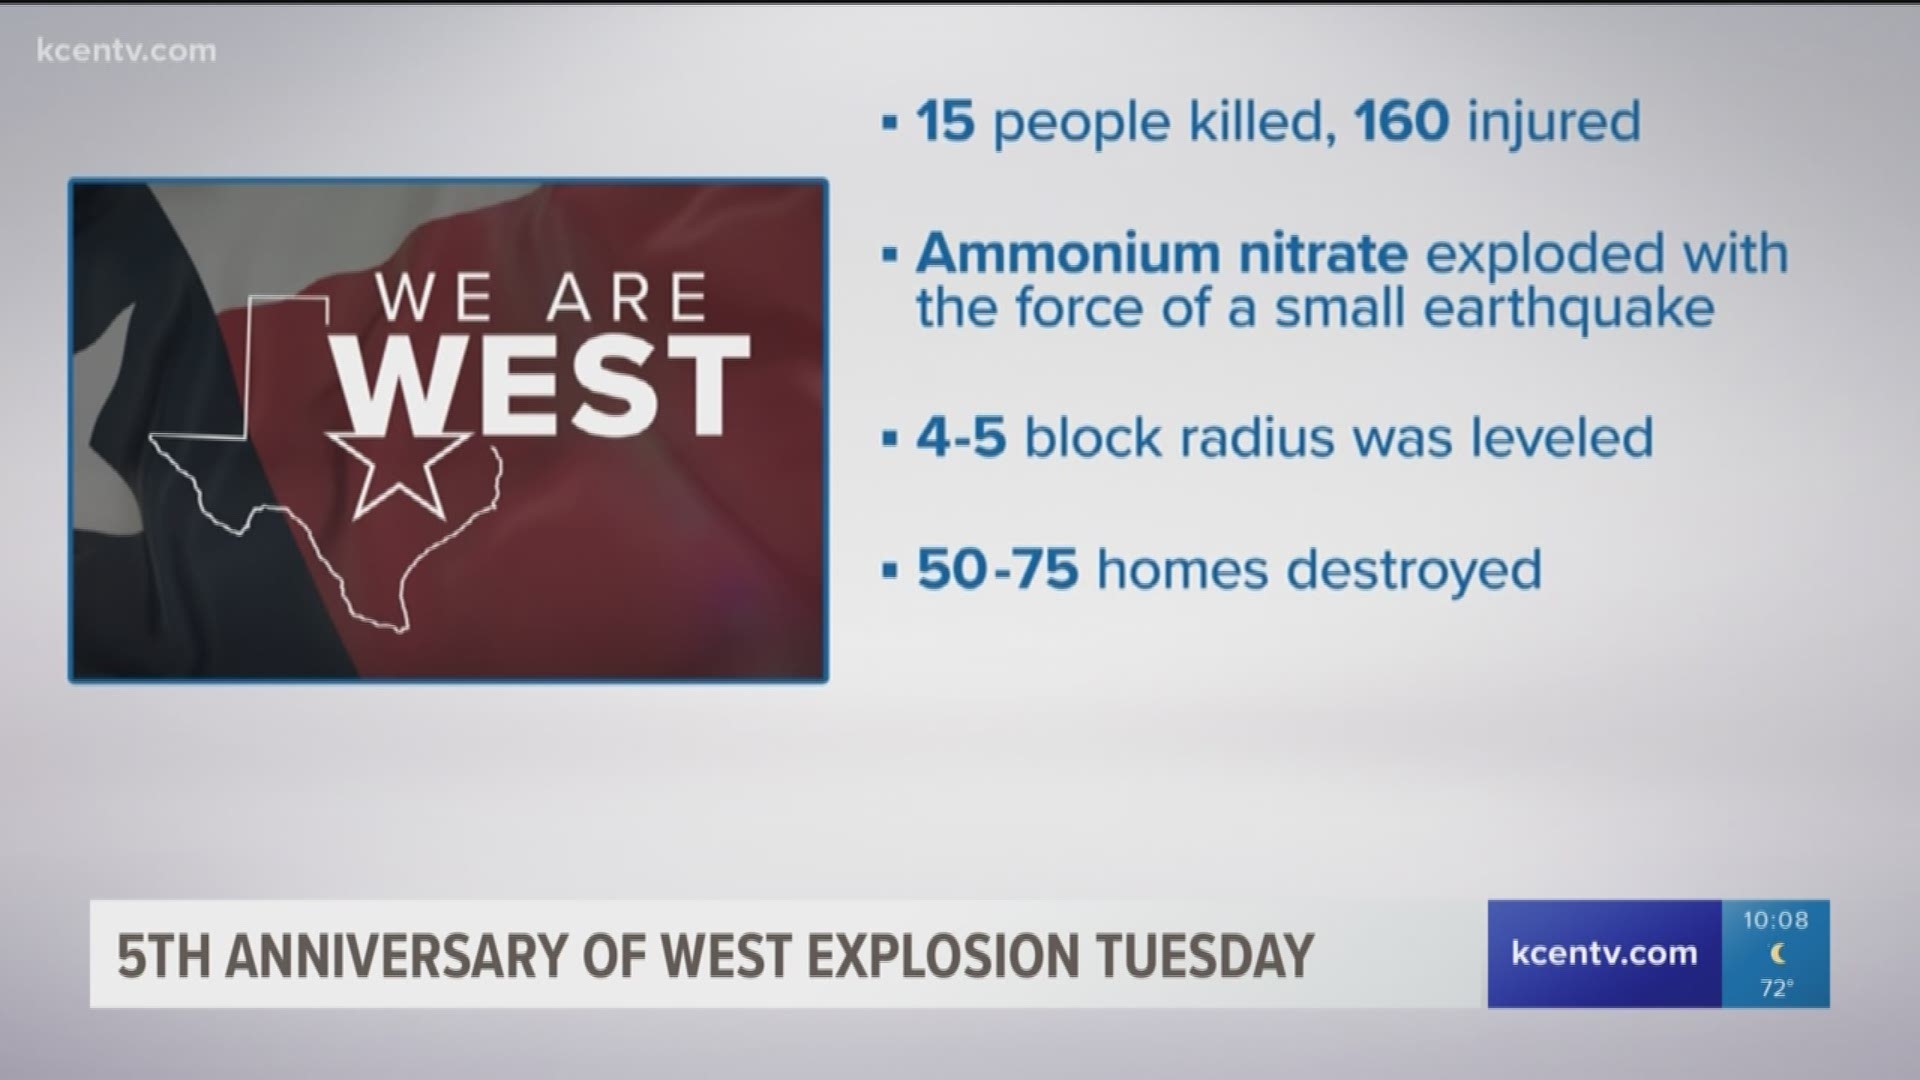 Tomorrow marks the 5th anniversary of the deadly fertilizer plant explosion in West. 